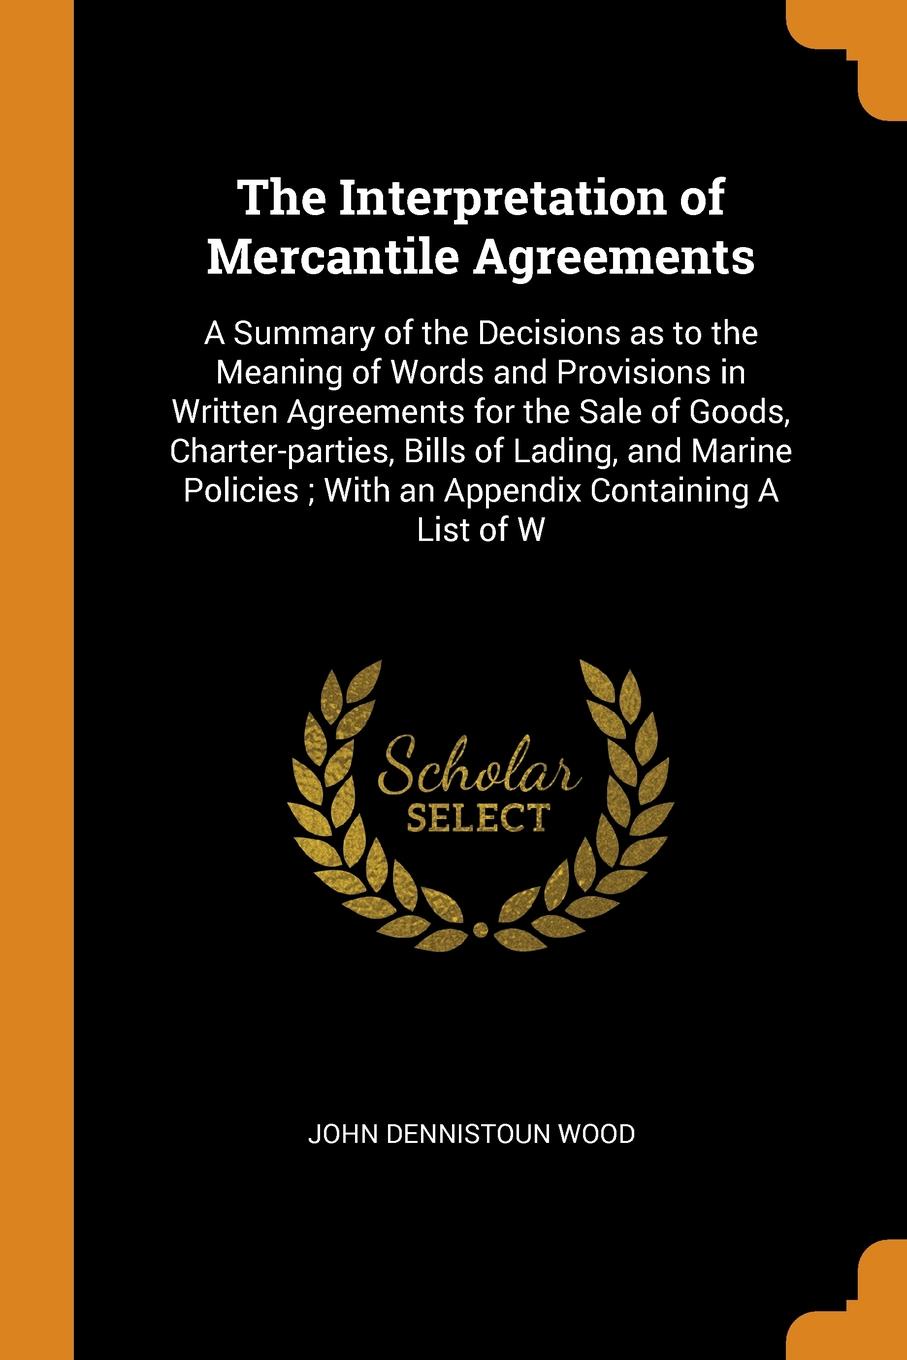 The Interpretation of Mercantile Agreements. A Summary of the Decisions as to the Meaning of Words and Provisions in Written Agreements for the Sale of Goods, Charter-parties, Bills of Lading, and Marine Policies ; With an Appendix Containing A Li...